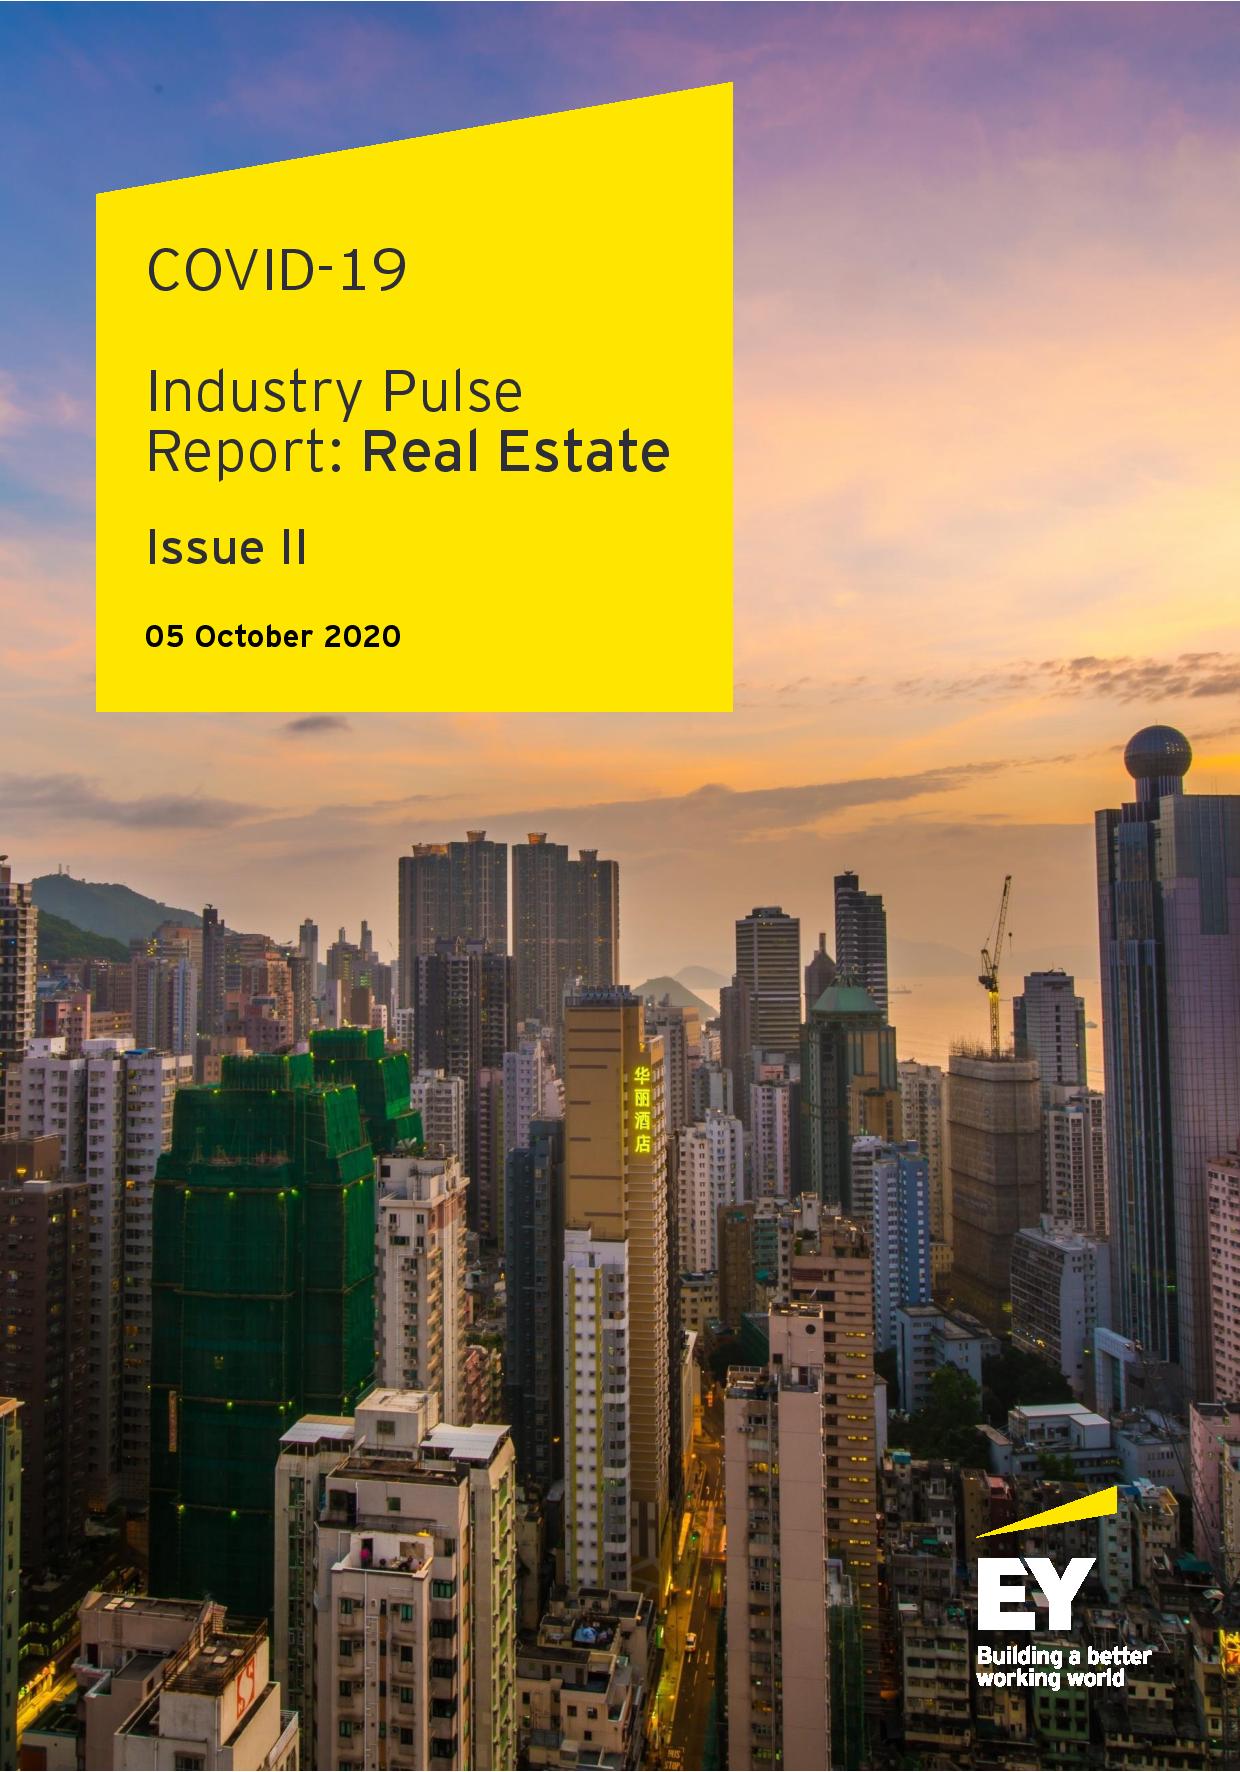 EY Cyprus: COVID-19 Industry Pulse Report: Real Estate Issue II